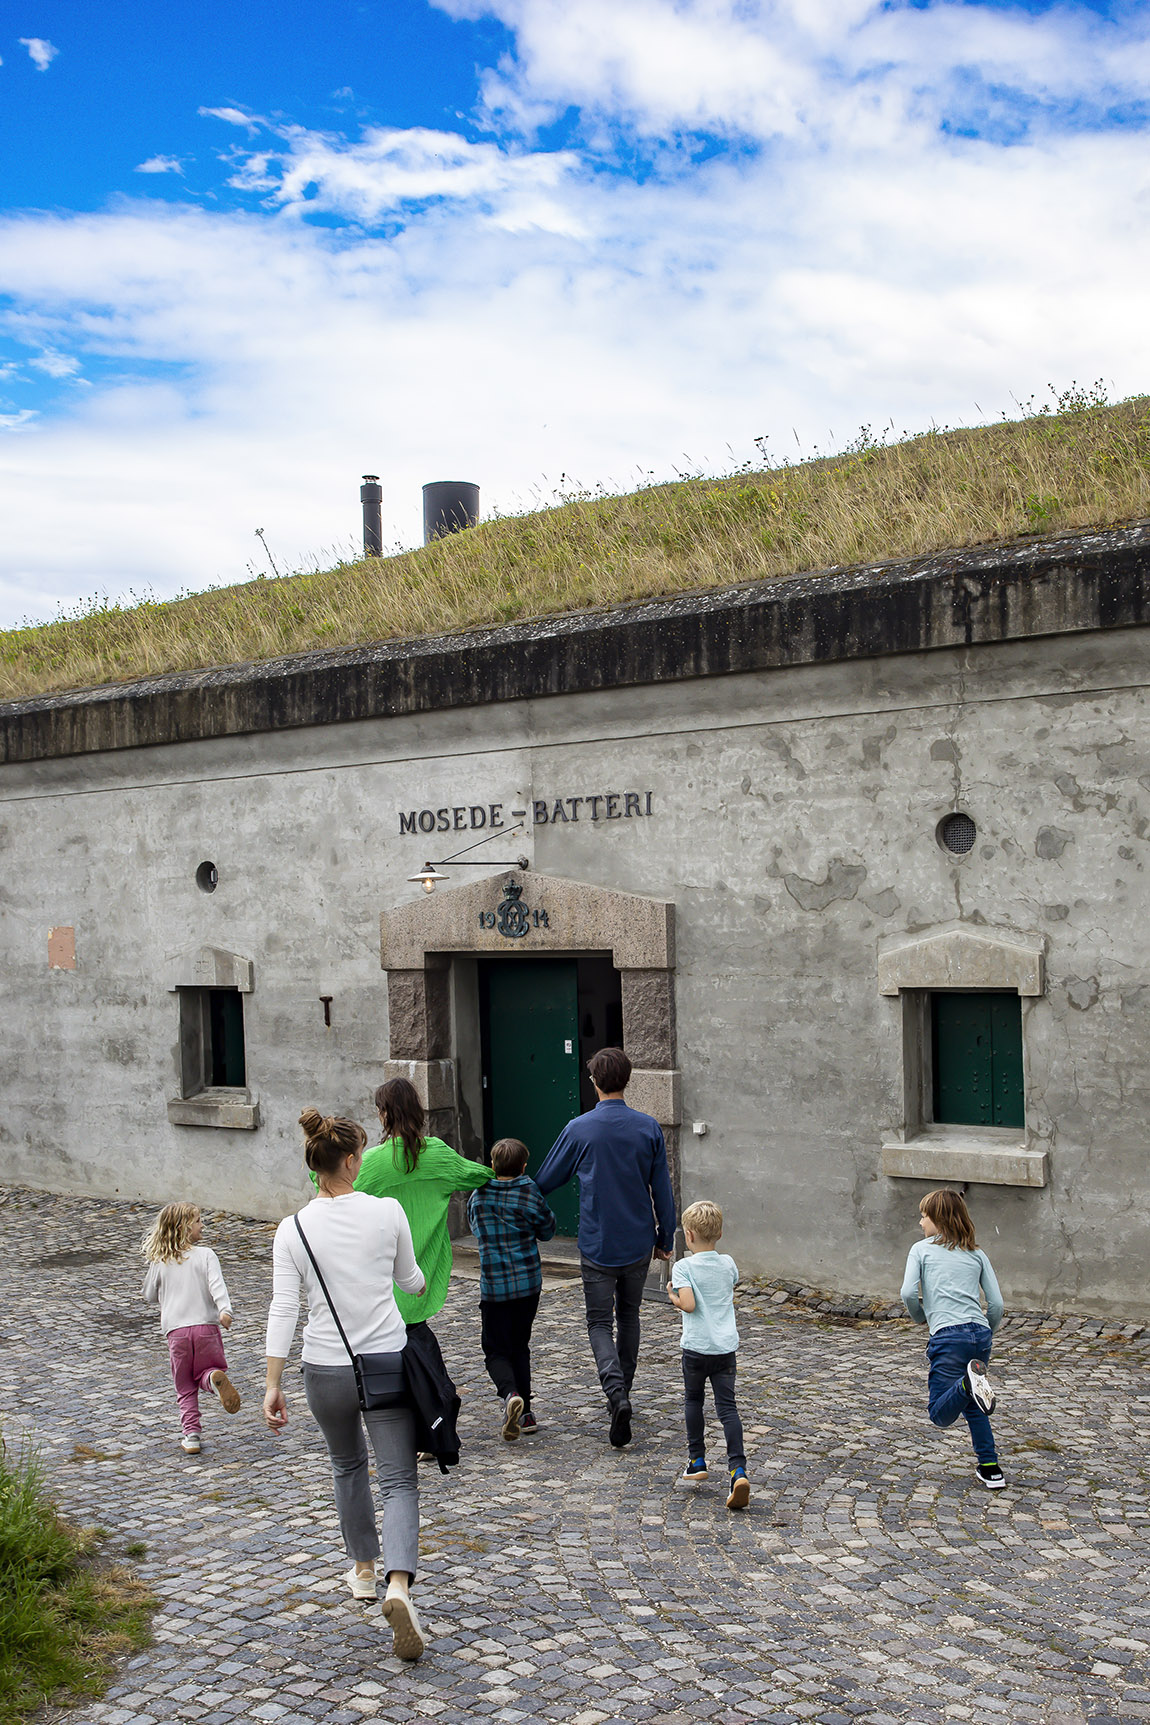 Mosede Fort - A historic fort with a modern story to tell
